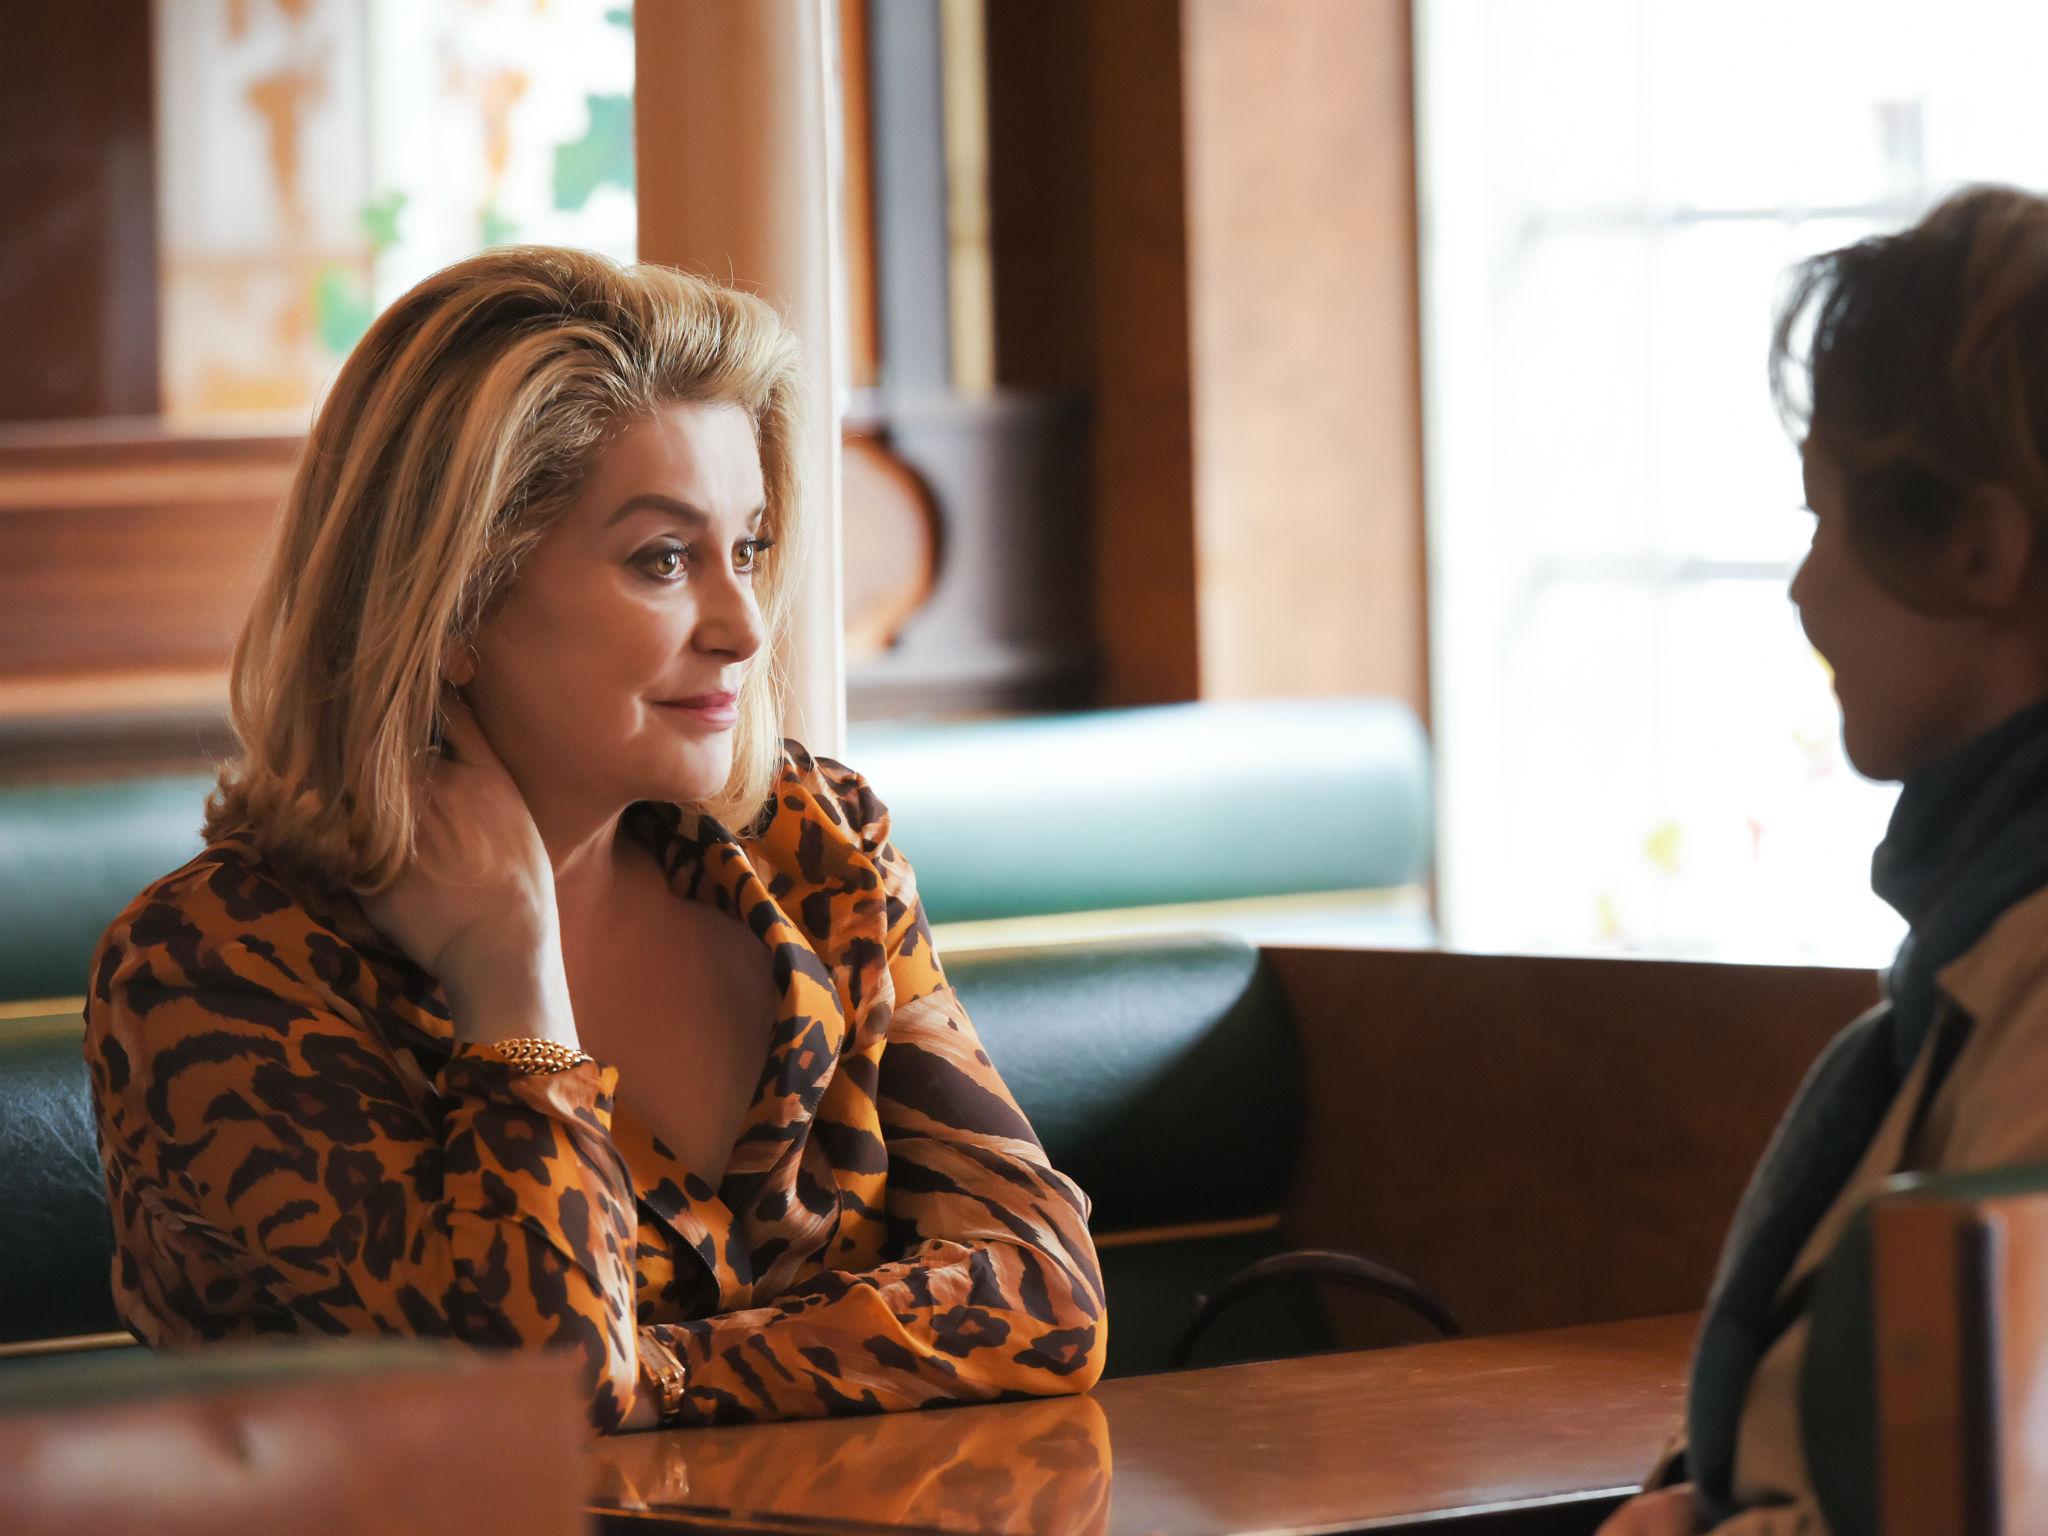 Catherine Deneuve on new film 'The Midwife', her public image and how the movie industry has changed